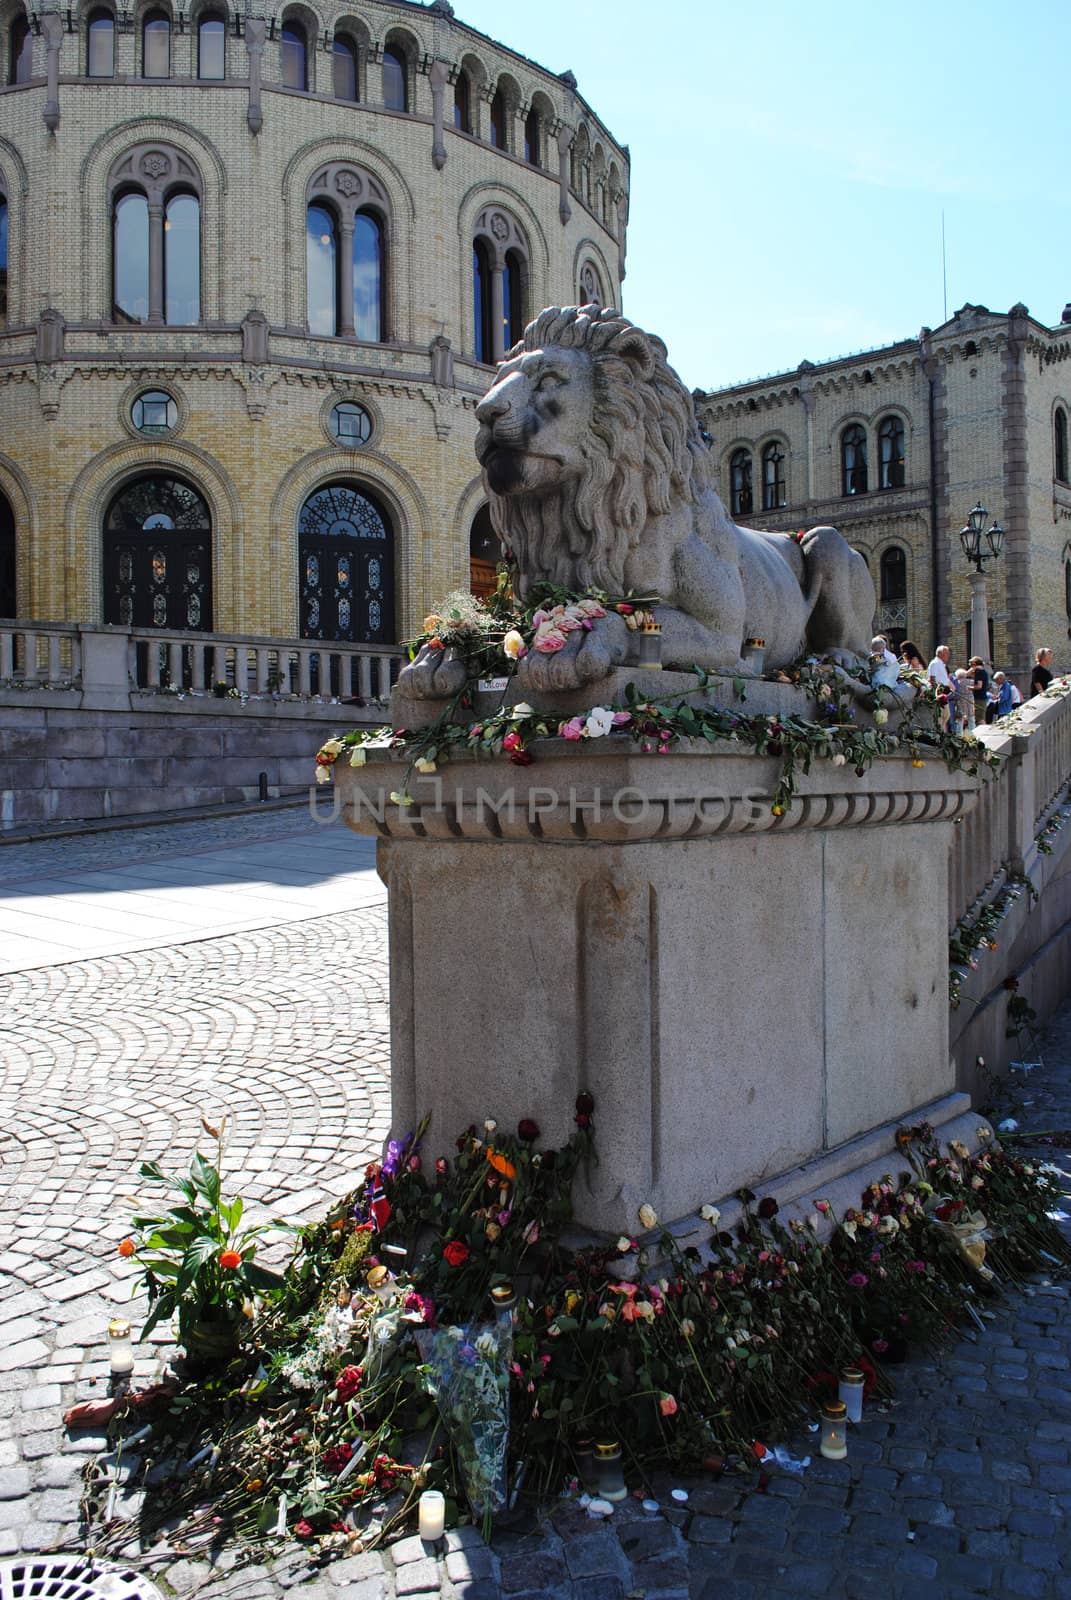 Flowers by the national lion at the norwegian parliament (Stortinget), in memory of the victims of the terror attack 22.07.2011.